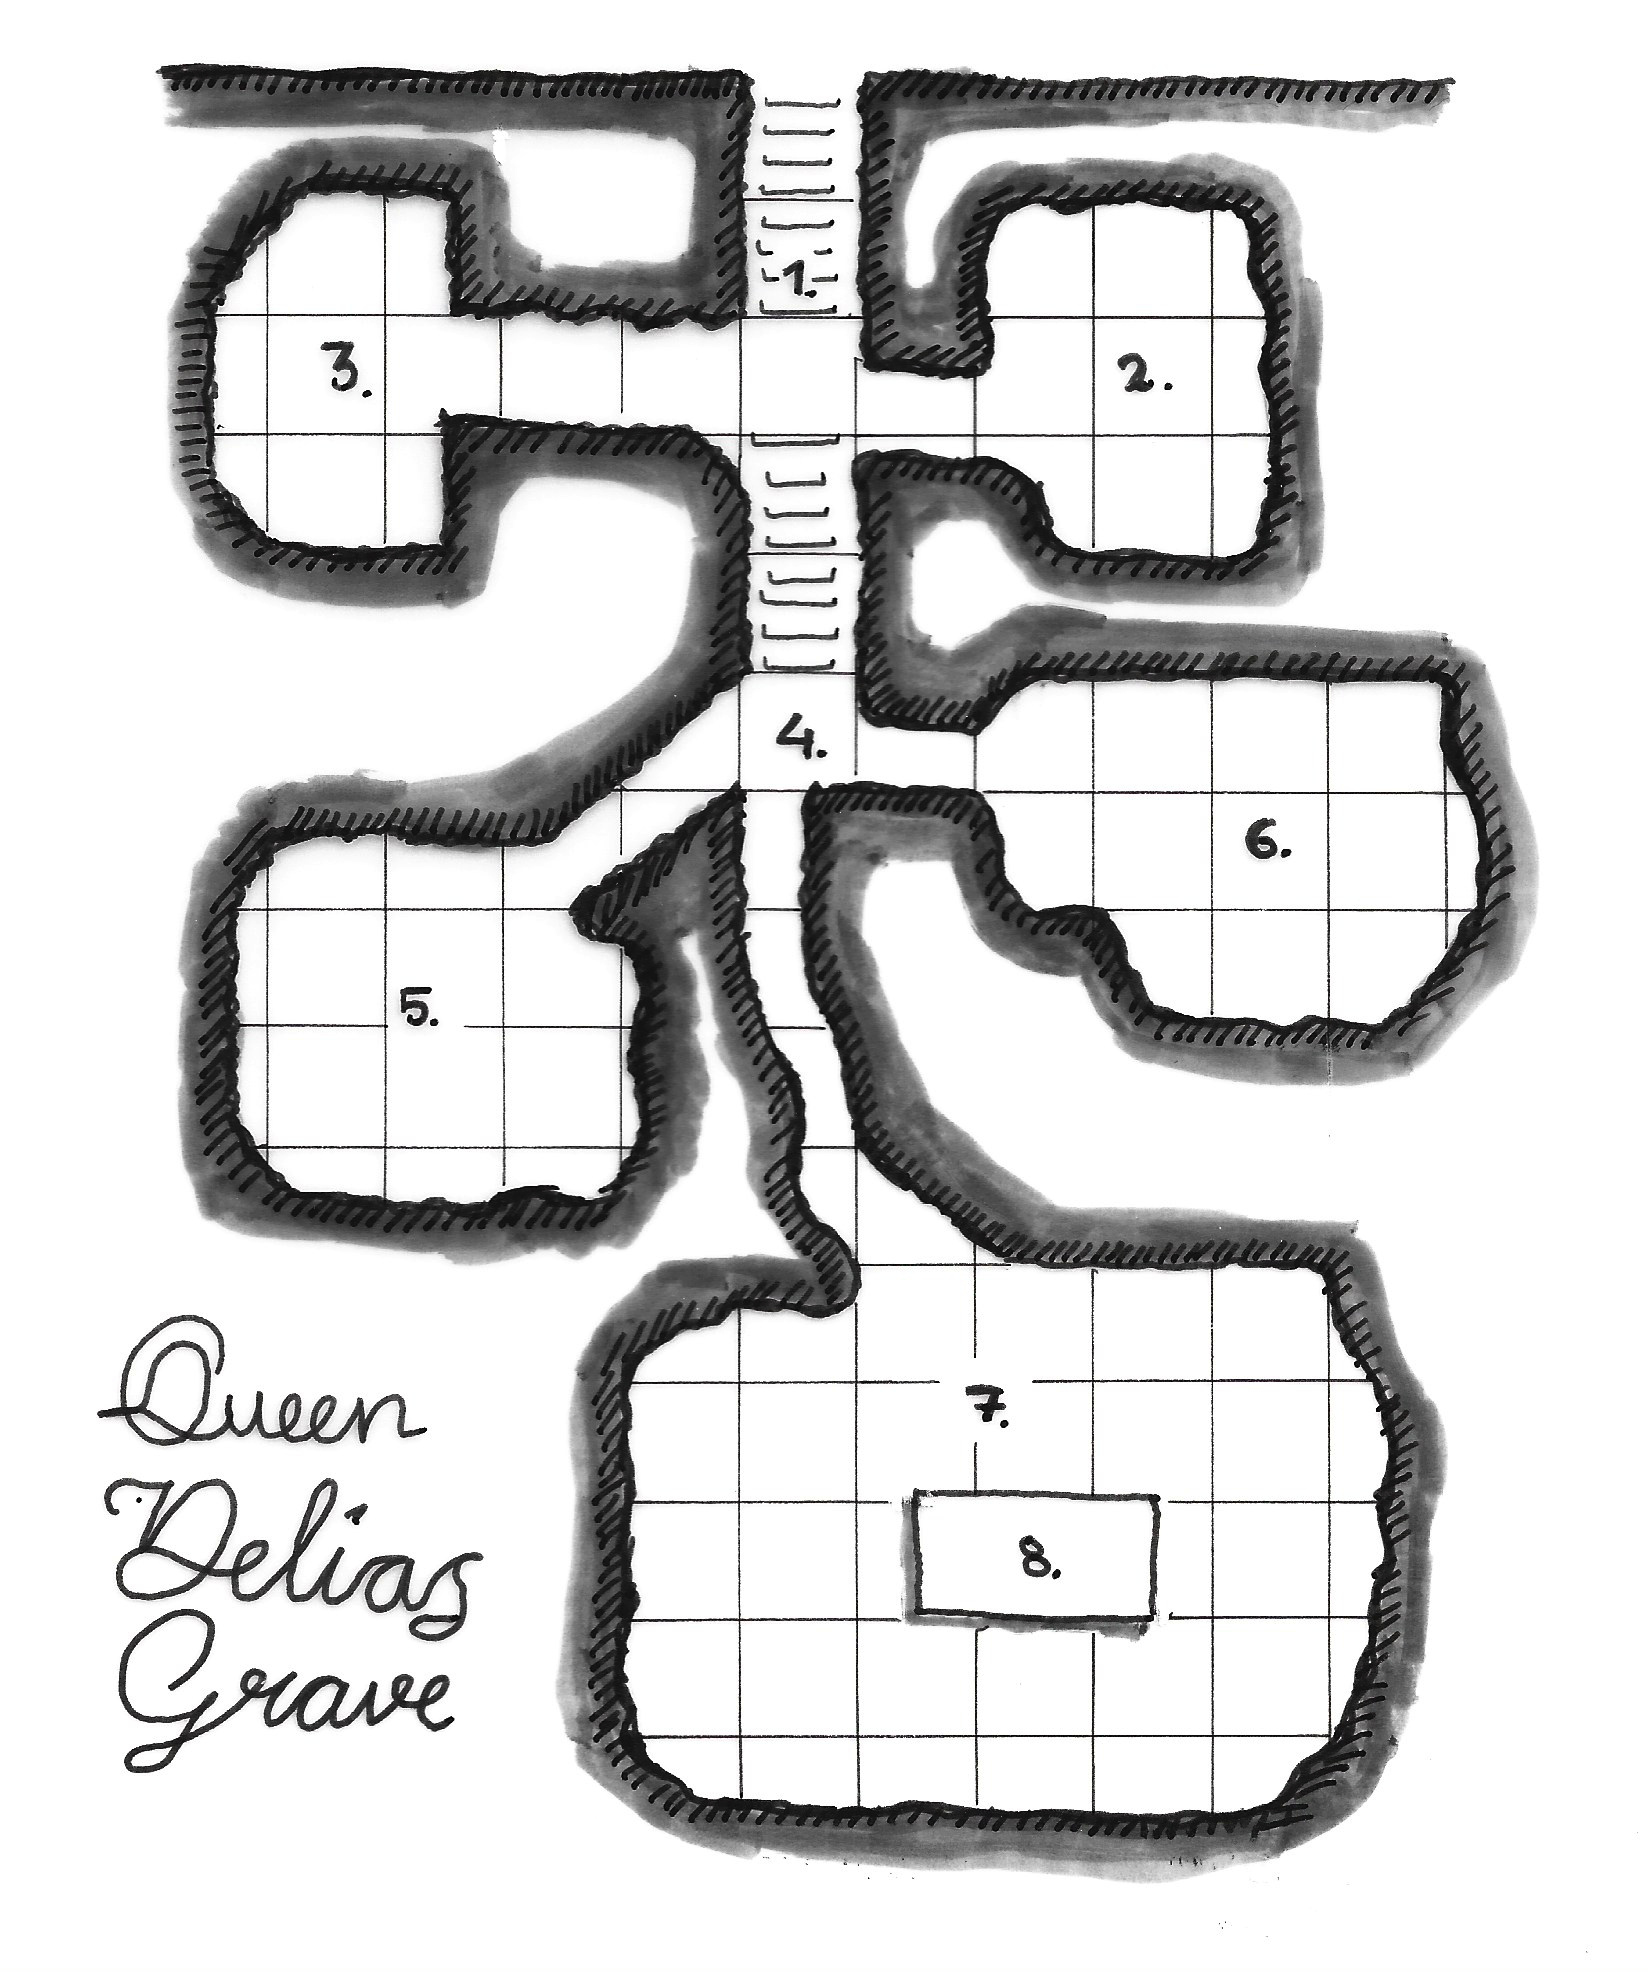 A map showing a burial mound with five chambers connected by a corridor.